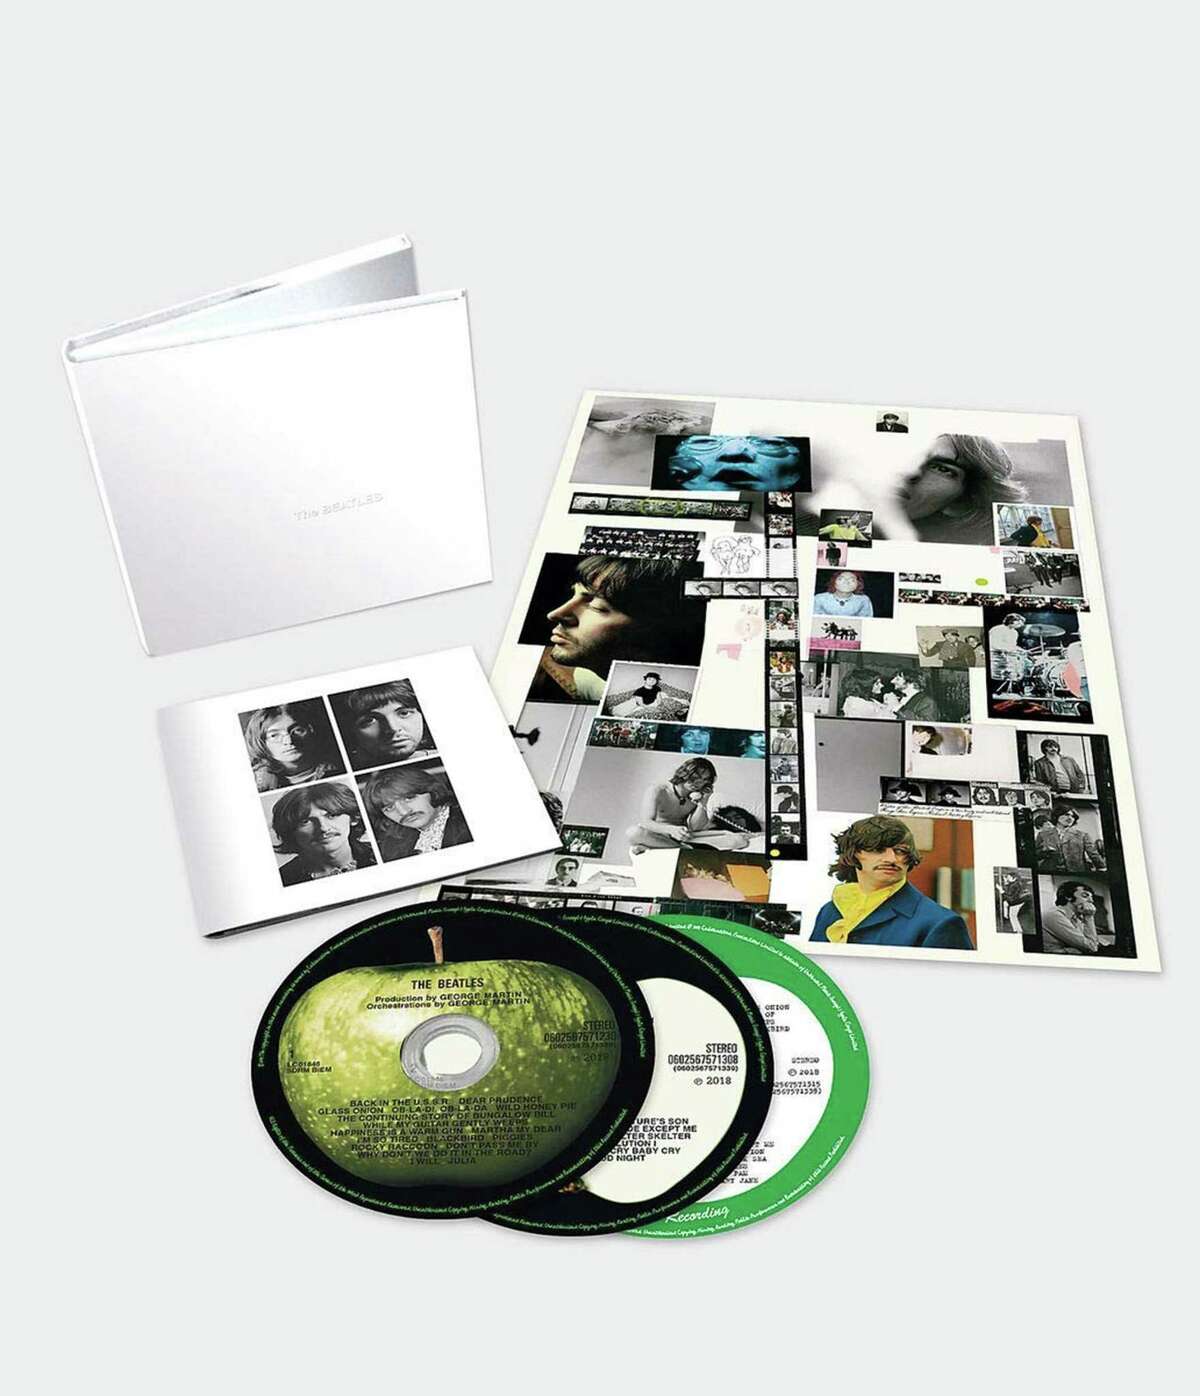 The Beatles “The White Album” anniversary set. The 50th-anniversary package of the White Album, so named for its groundbreaking plain white cover with the band’s name subtly embossed, off center, and an individual serial number stamped on original pressings, offers the deepest dive yet into the Abbey Road archives of Beatles material.